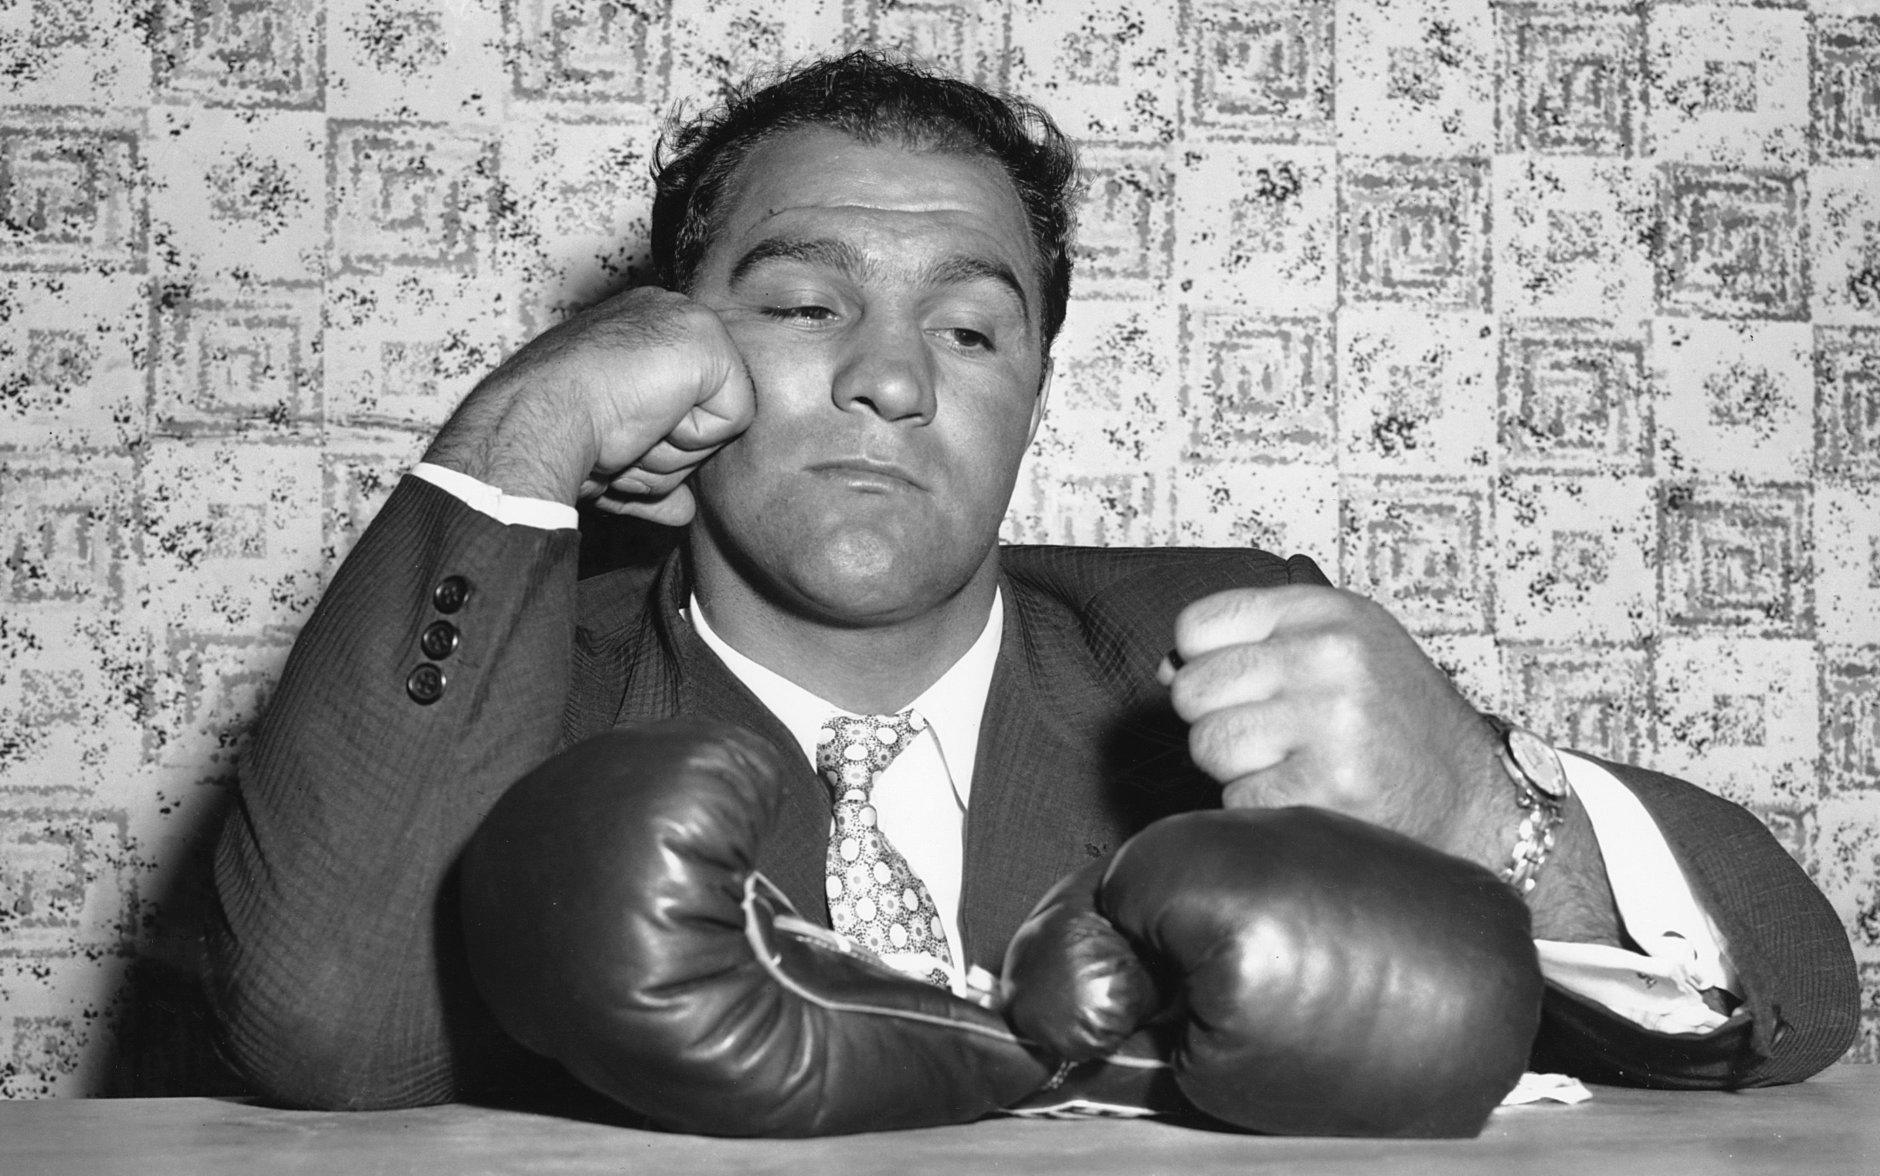 FILE  - In this April 27, 1956 file photo, World heavyweight champion Rocky Marciano gestures at a new conference in New York after announcing his retirement from boxing. Marciano had been the world heavyweight champion for four years and won all 49 of his fights _ 43 by knockout _ when he retired in 1956 at the age of 32. The American wanted to spend more time with his family. (AP Photo, File)